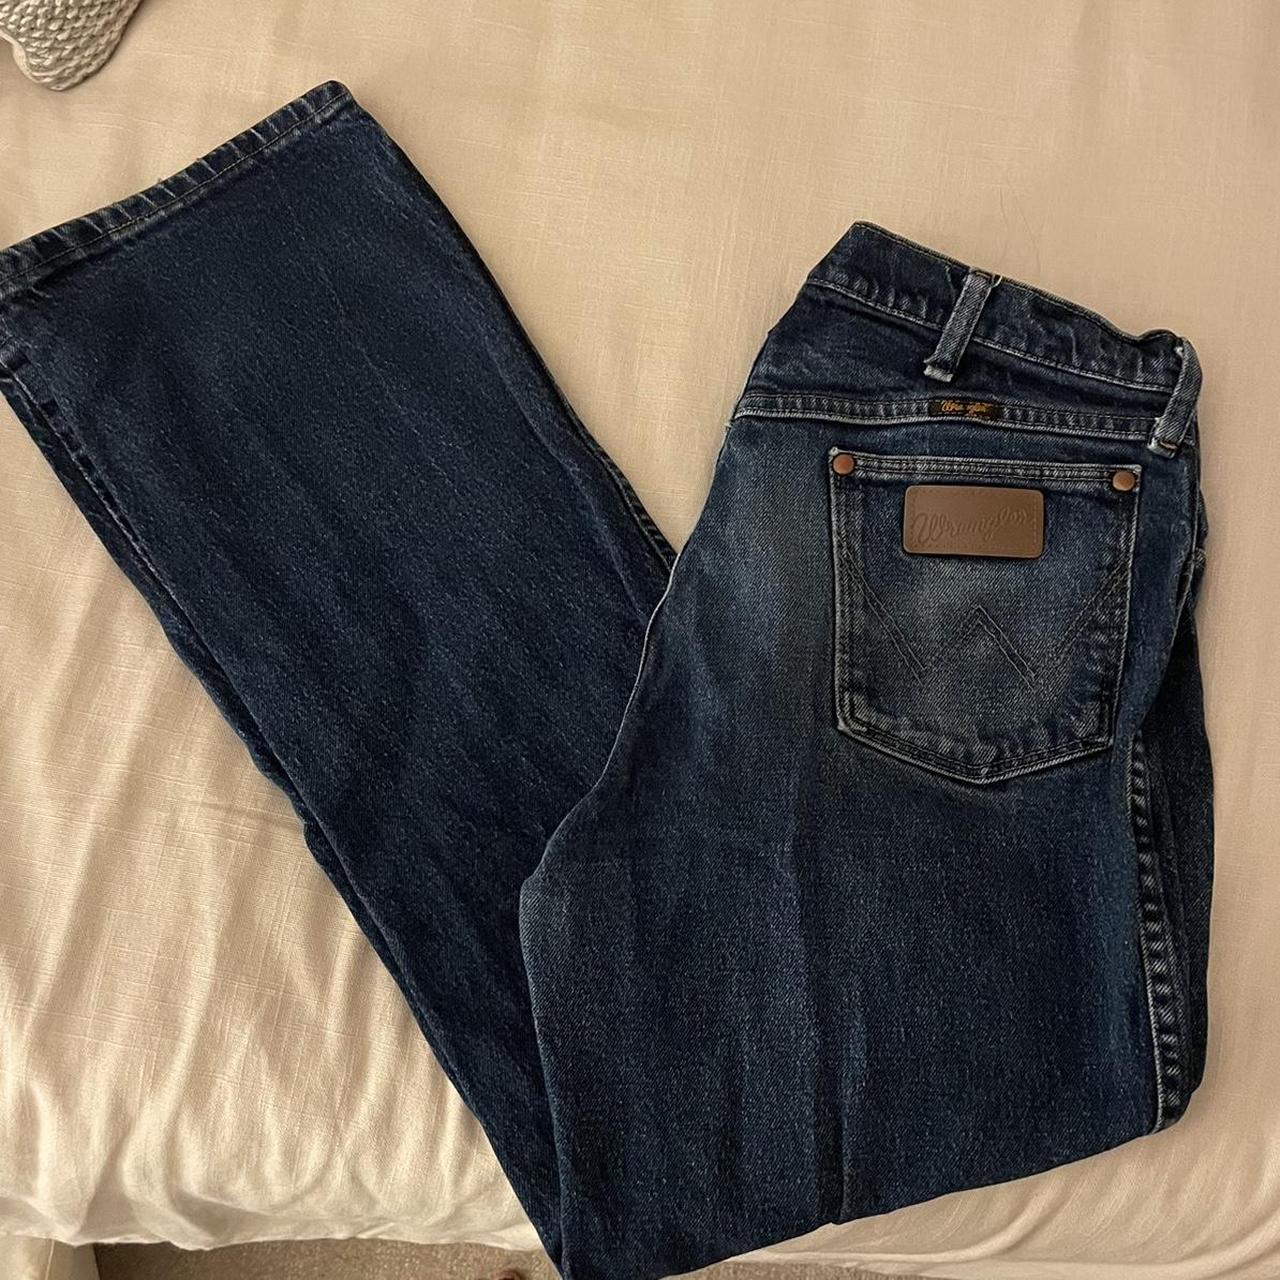 Vintage thrifted wrangler jeans! Very flattering and... - Depop